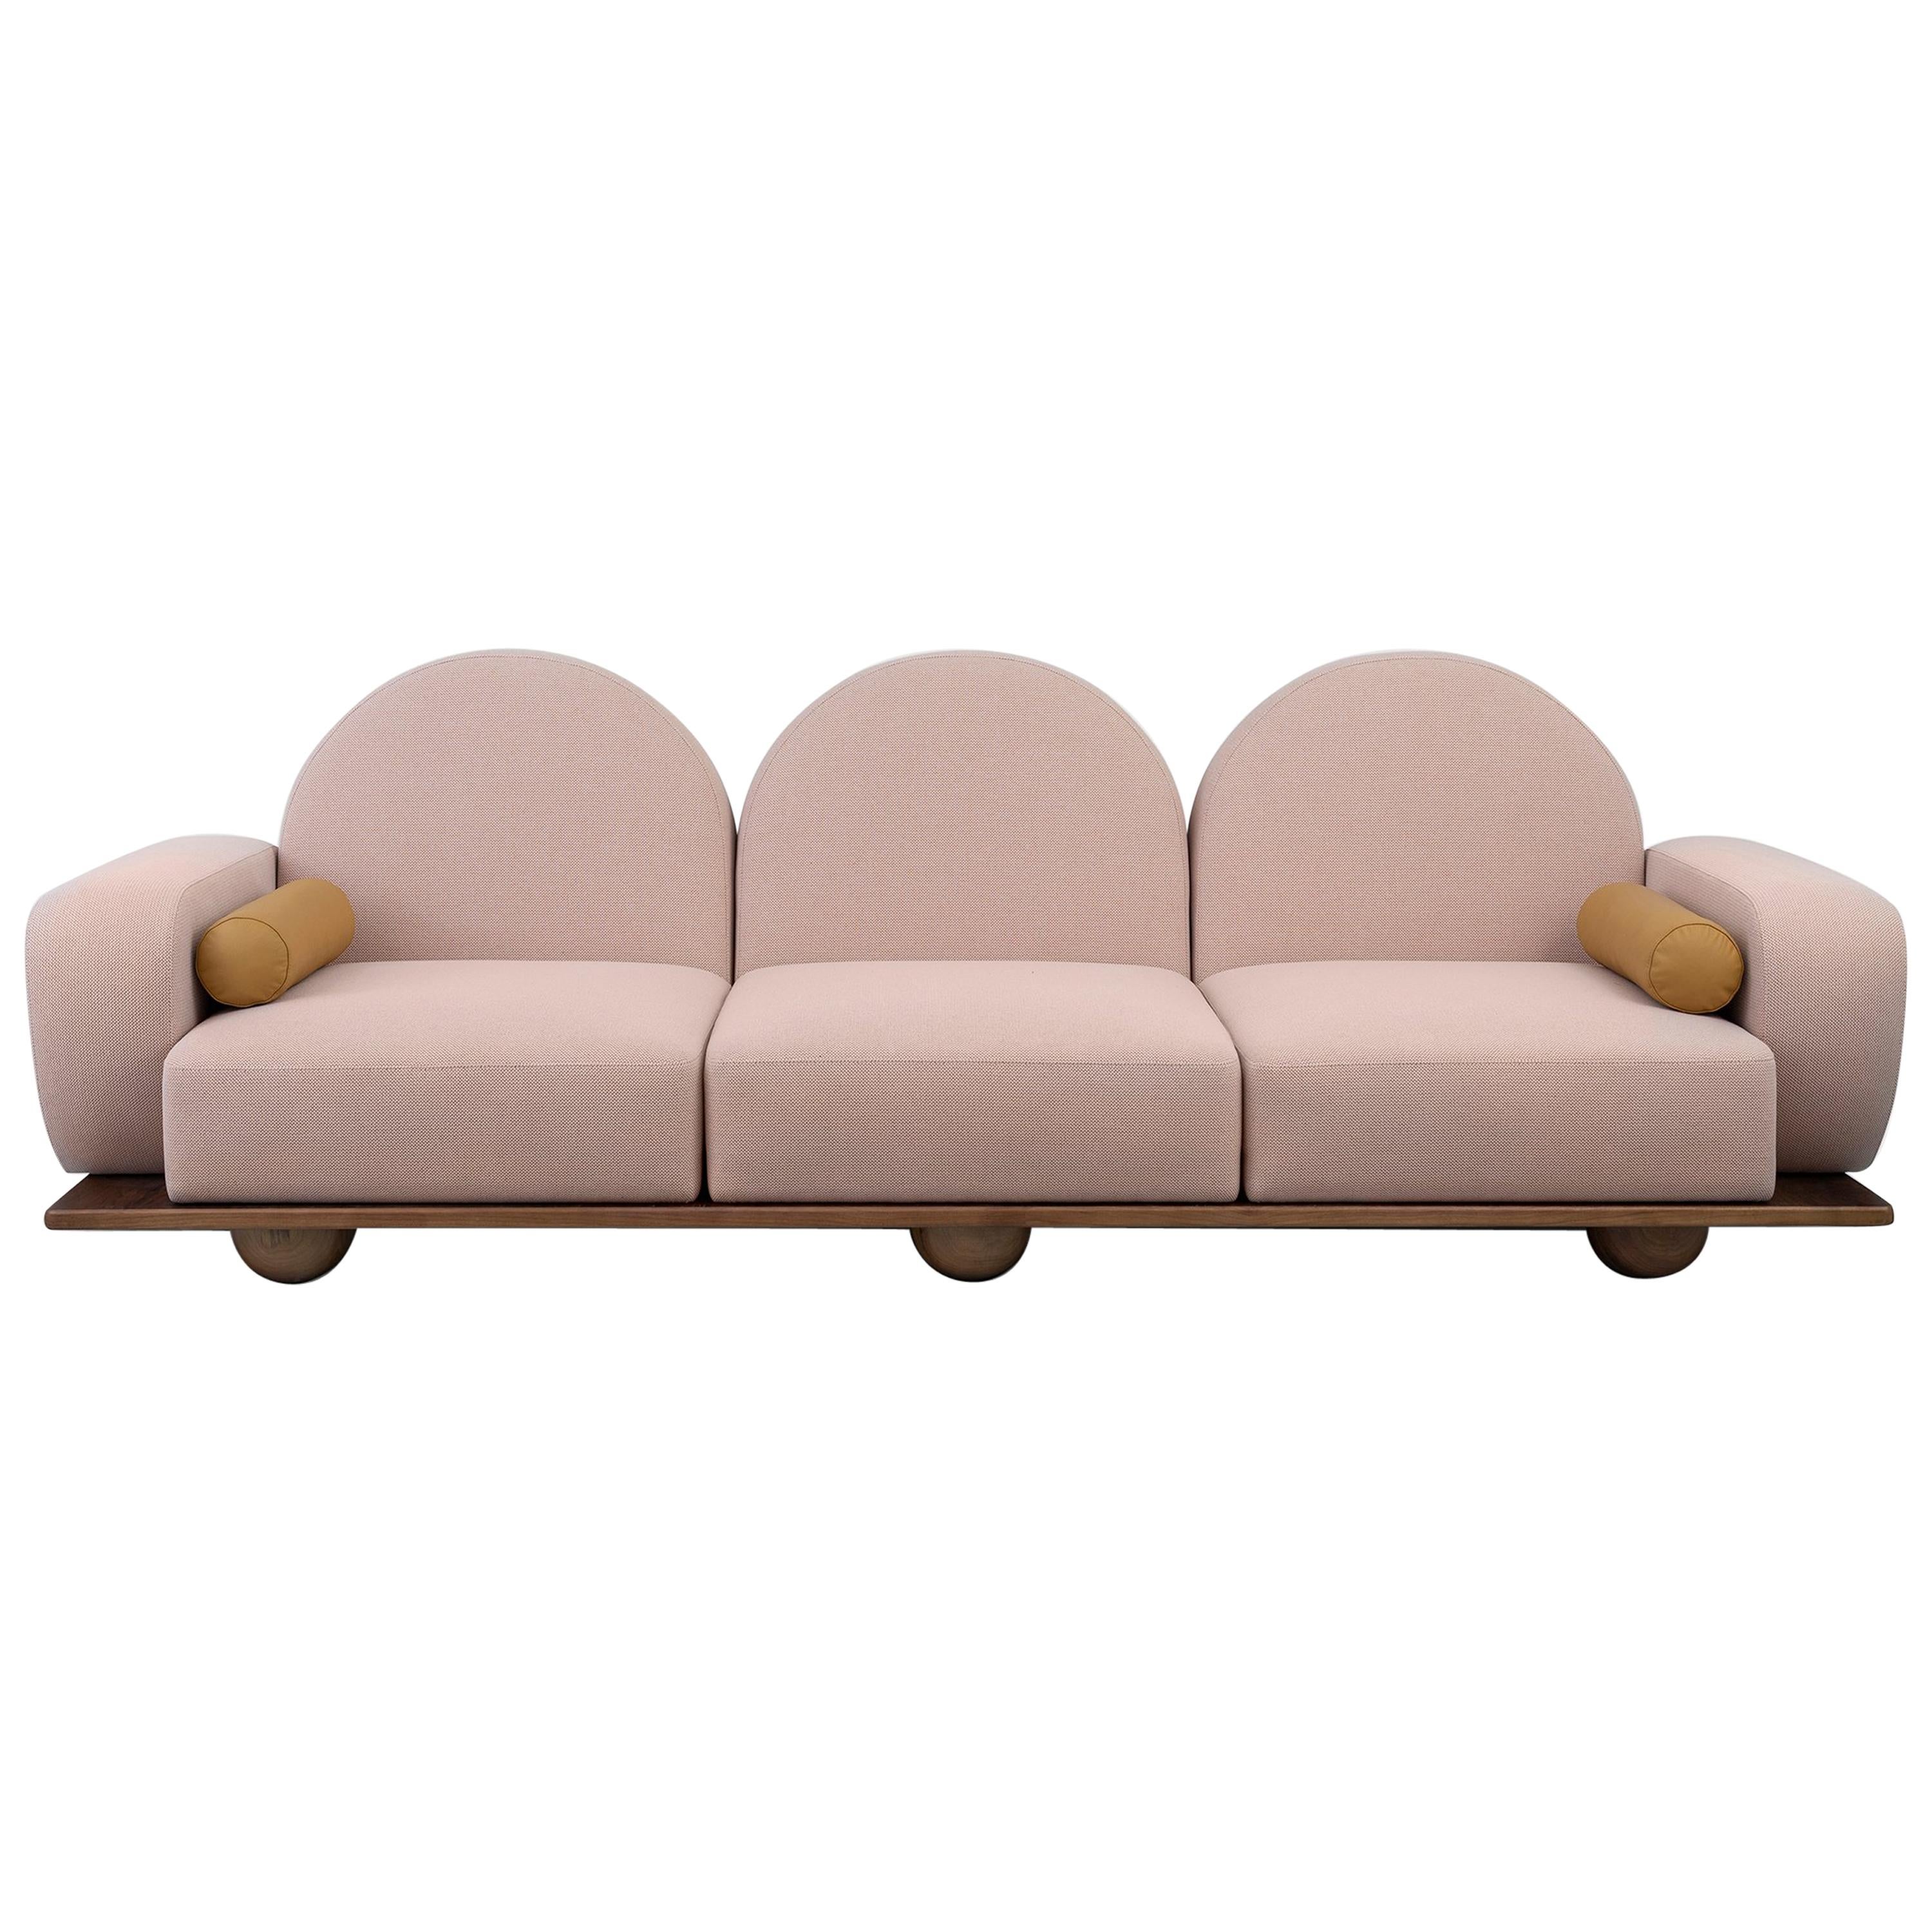 Beice 3-Seat Sofa For Sale at 1stDibs